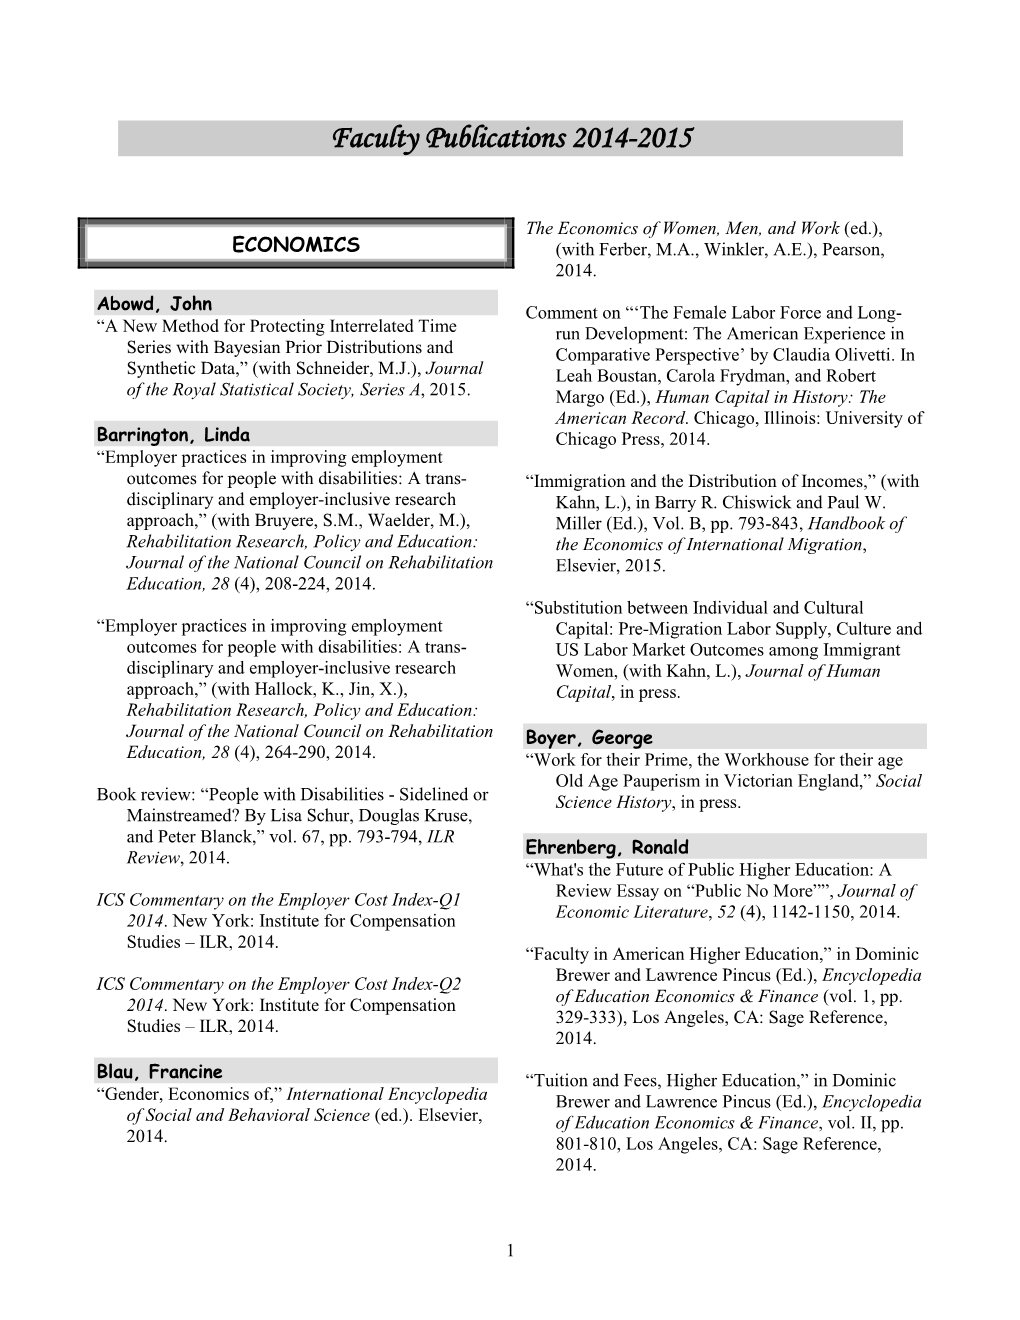 Faculty Publications 1997-98